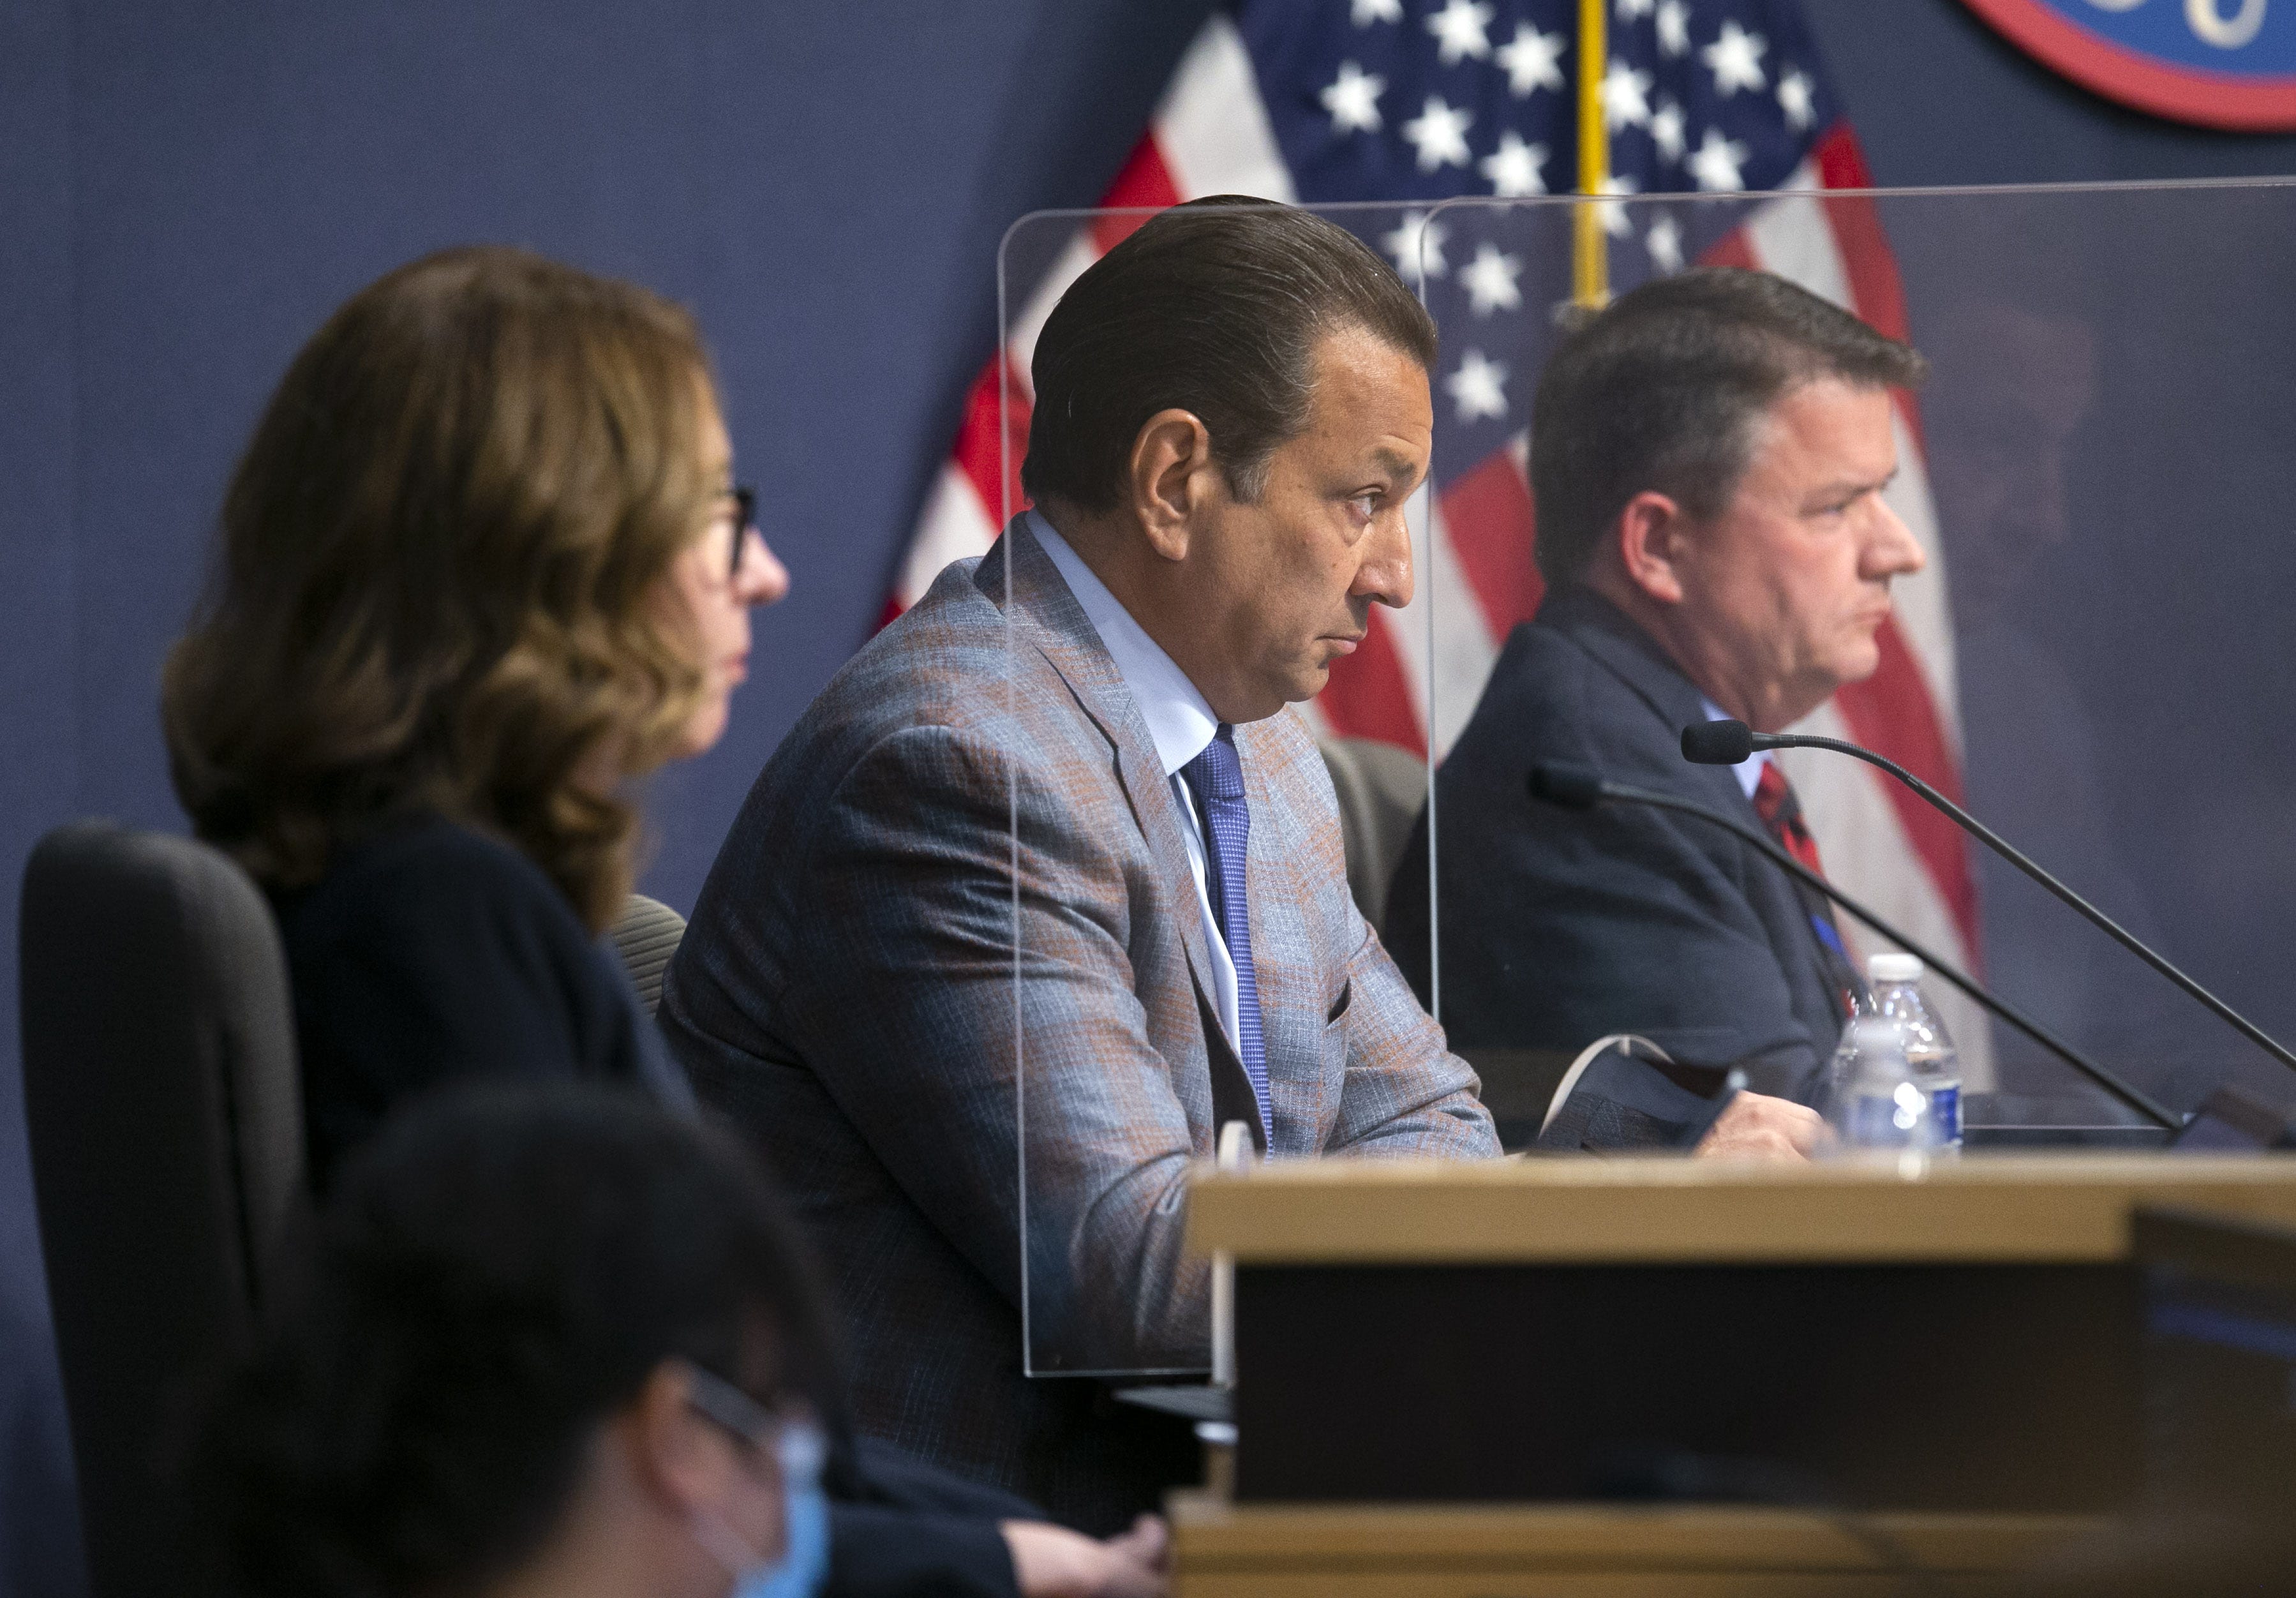 Former Maricopa County Supervisor Steve Chucri, center, listens during a Board of Supervisors meeting about the ballot review on May 17, 2021. He resigned in early November after secretly recorded audio of him speaking poorly of his colleagues was leaked to a website that publishes far-right information.